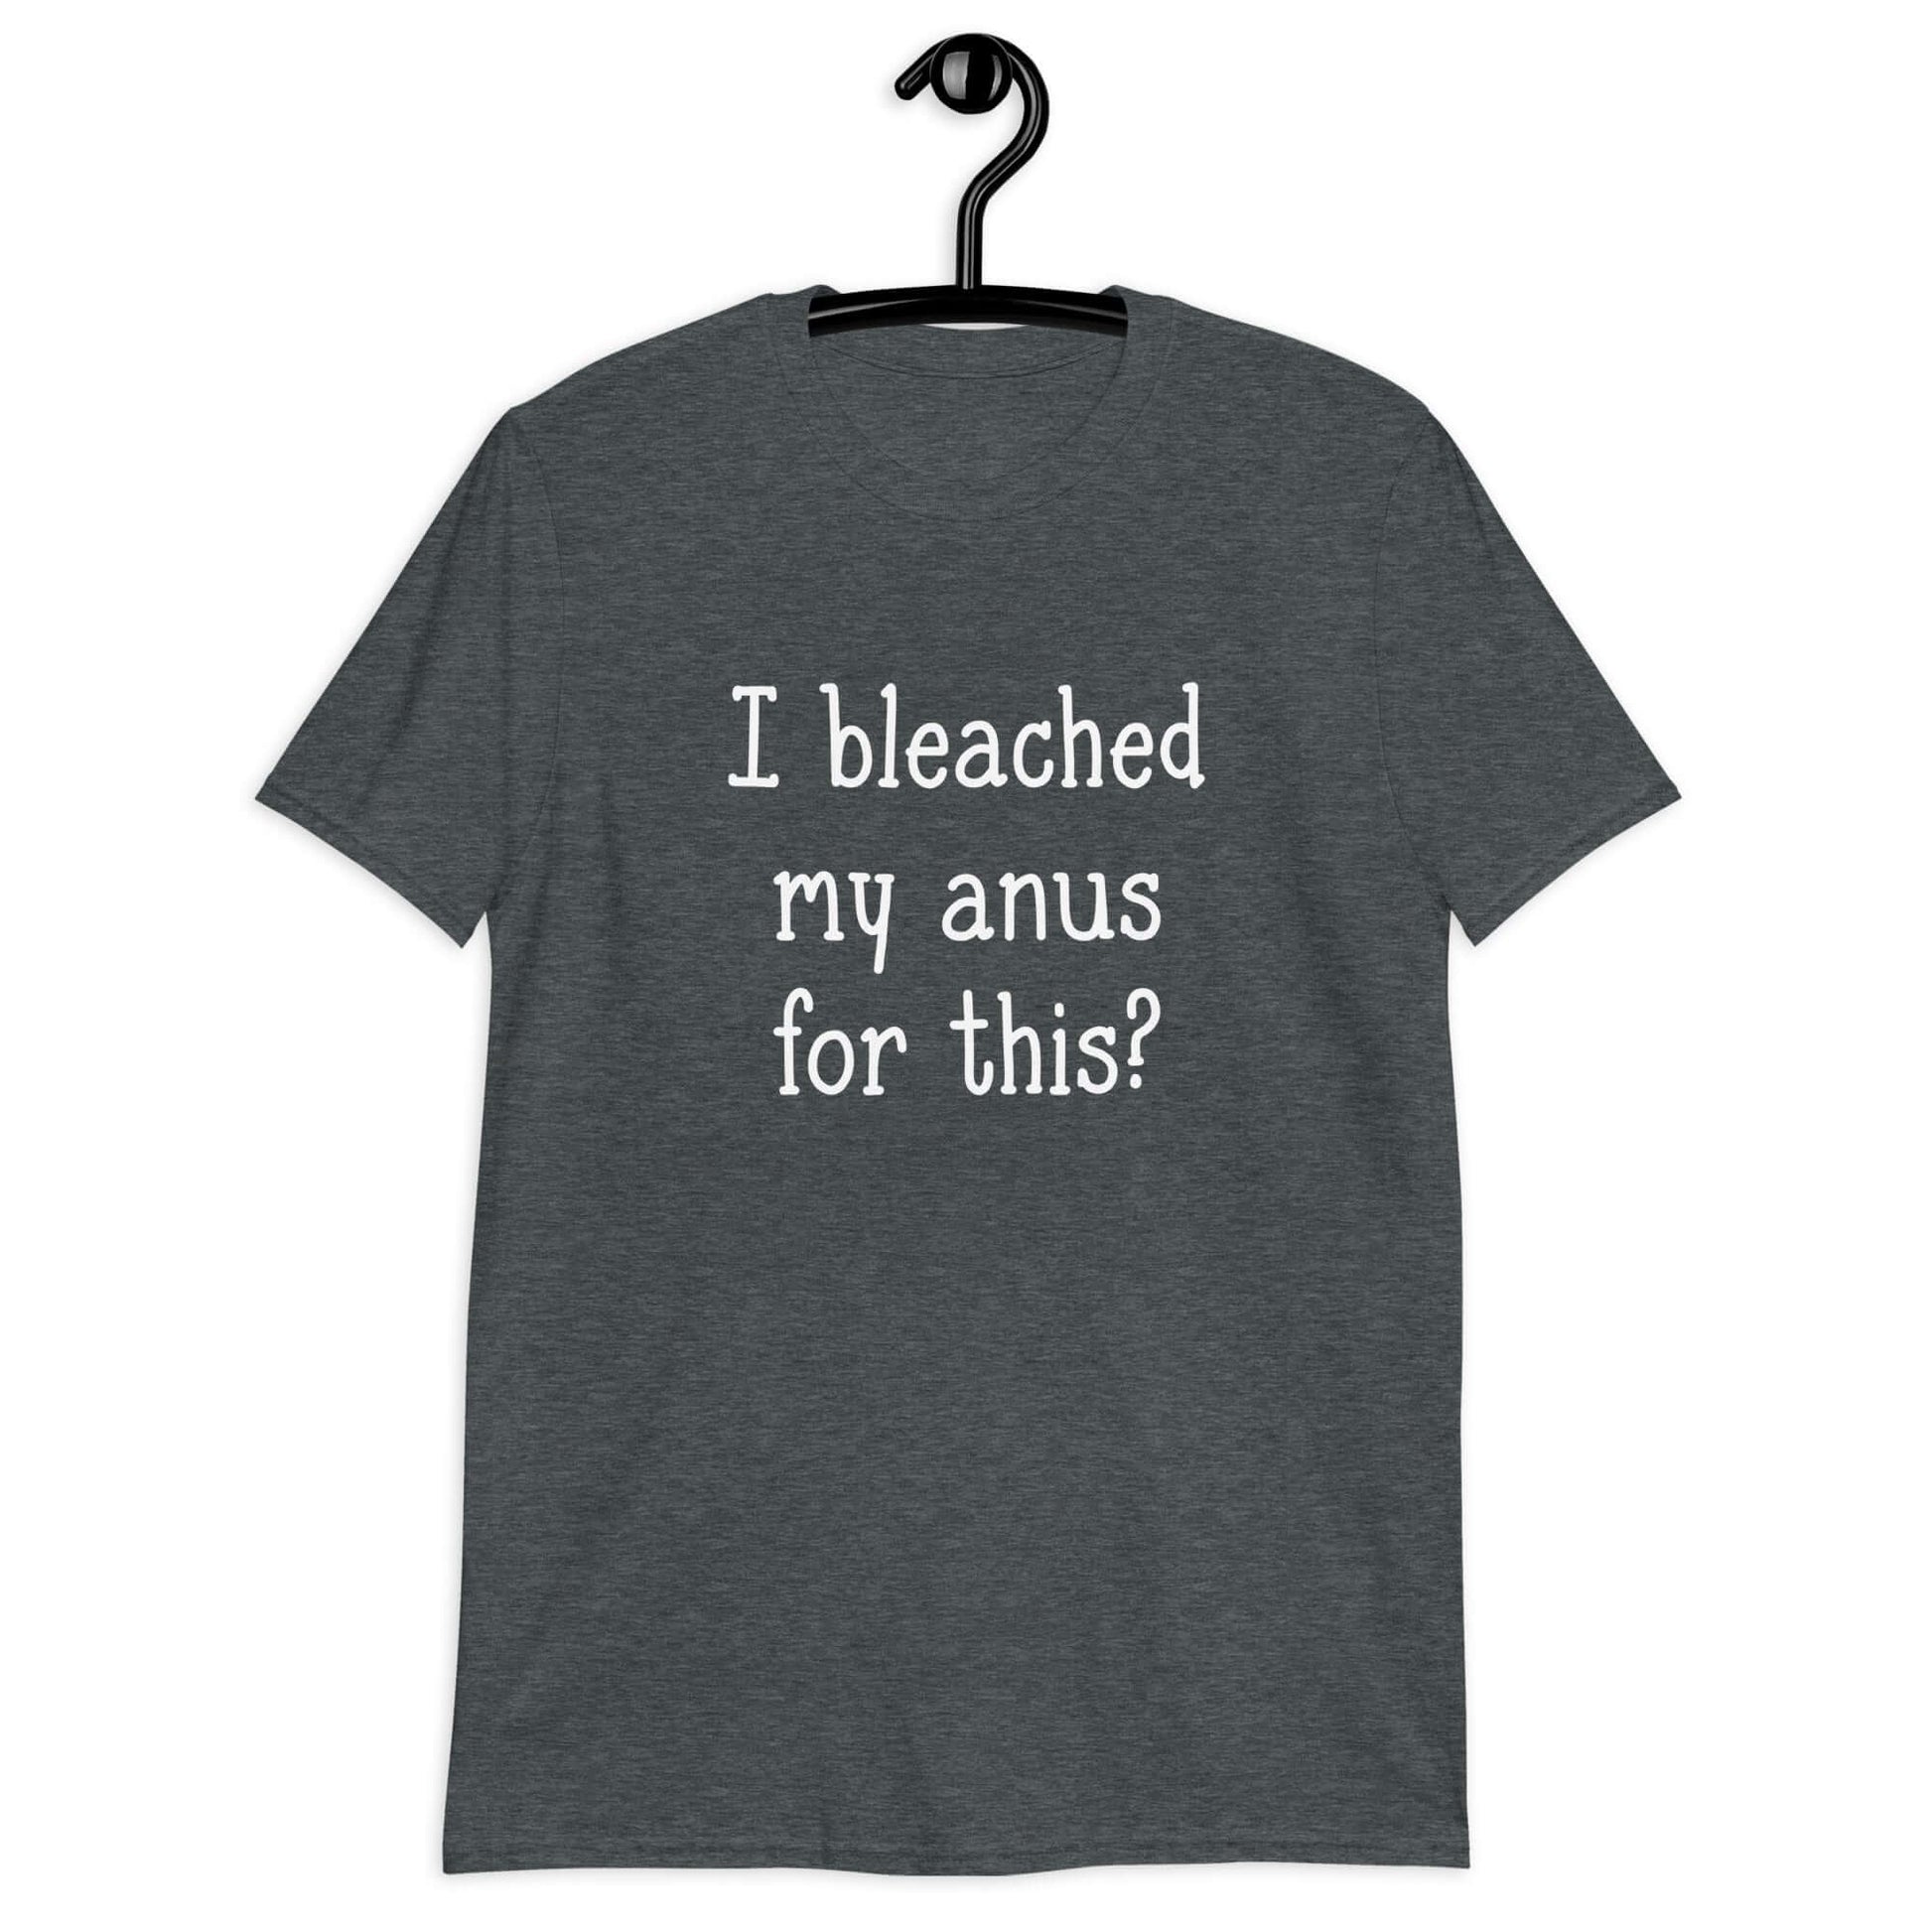 Dark heather grey t-shirt with the words I bleached my anus for this printed on the front.